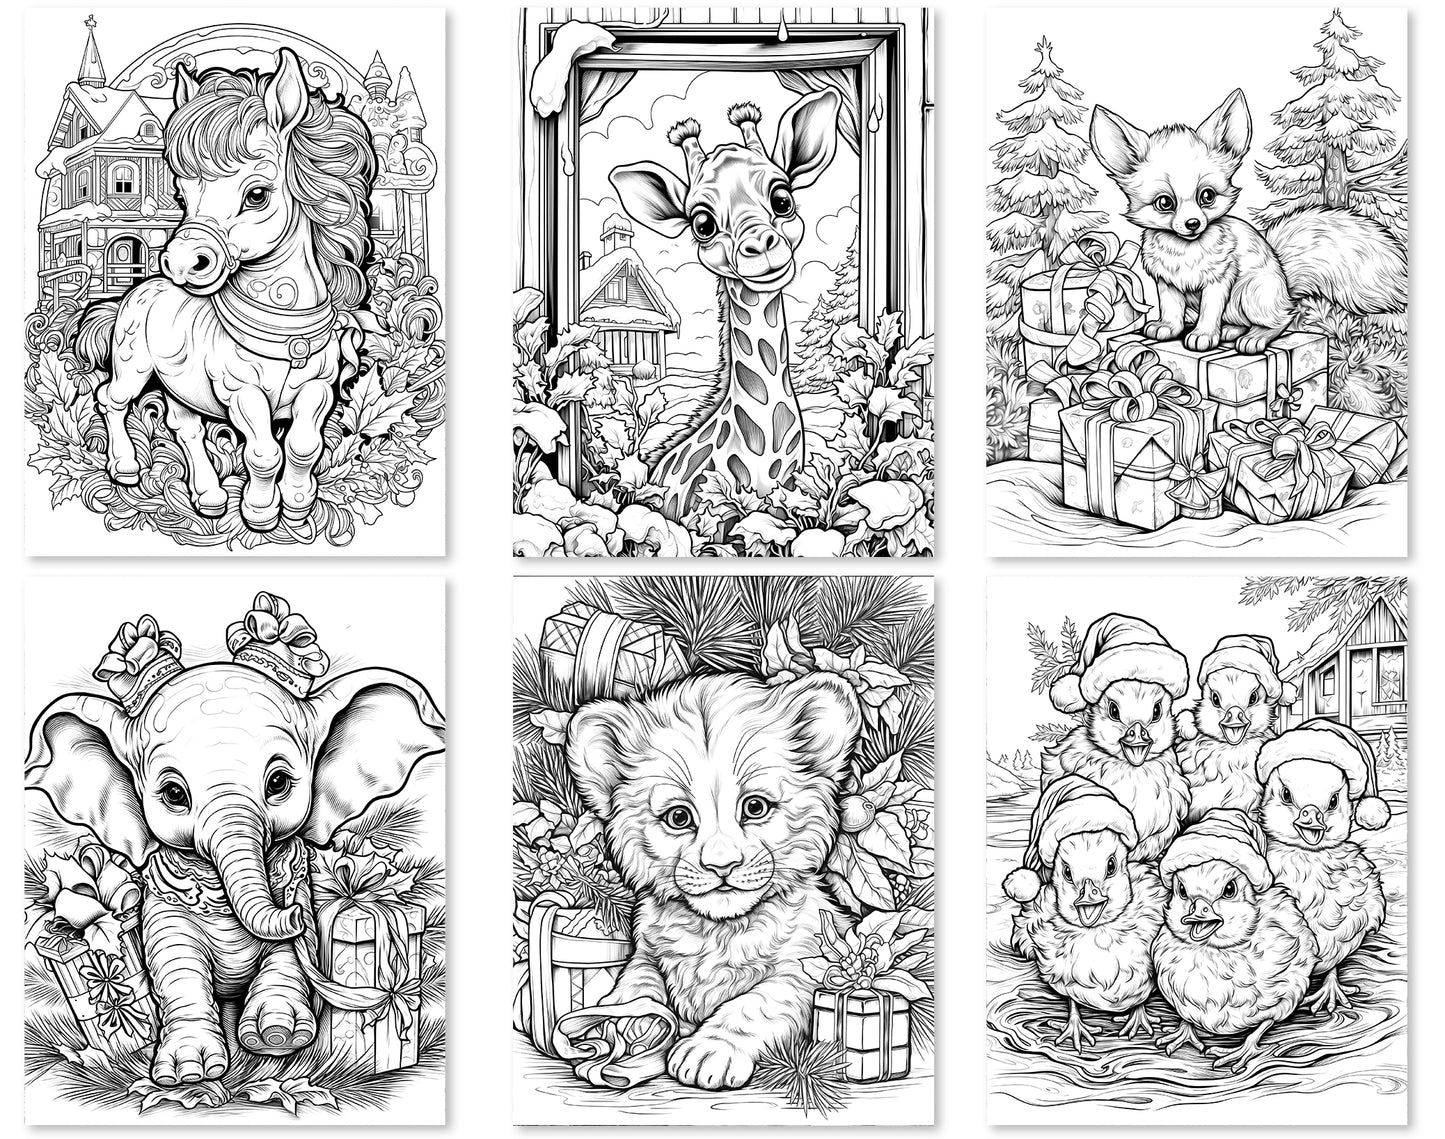 50 Christmas Critter 2 Coloring Pages - Instant Download - Printable